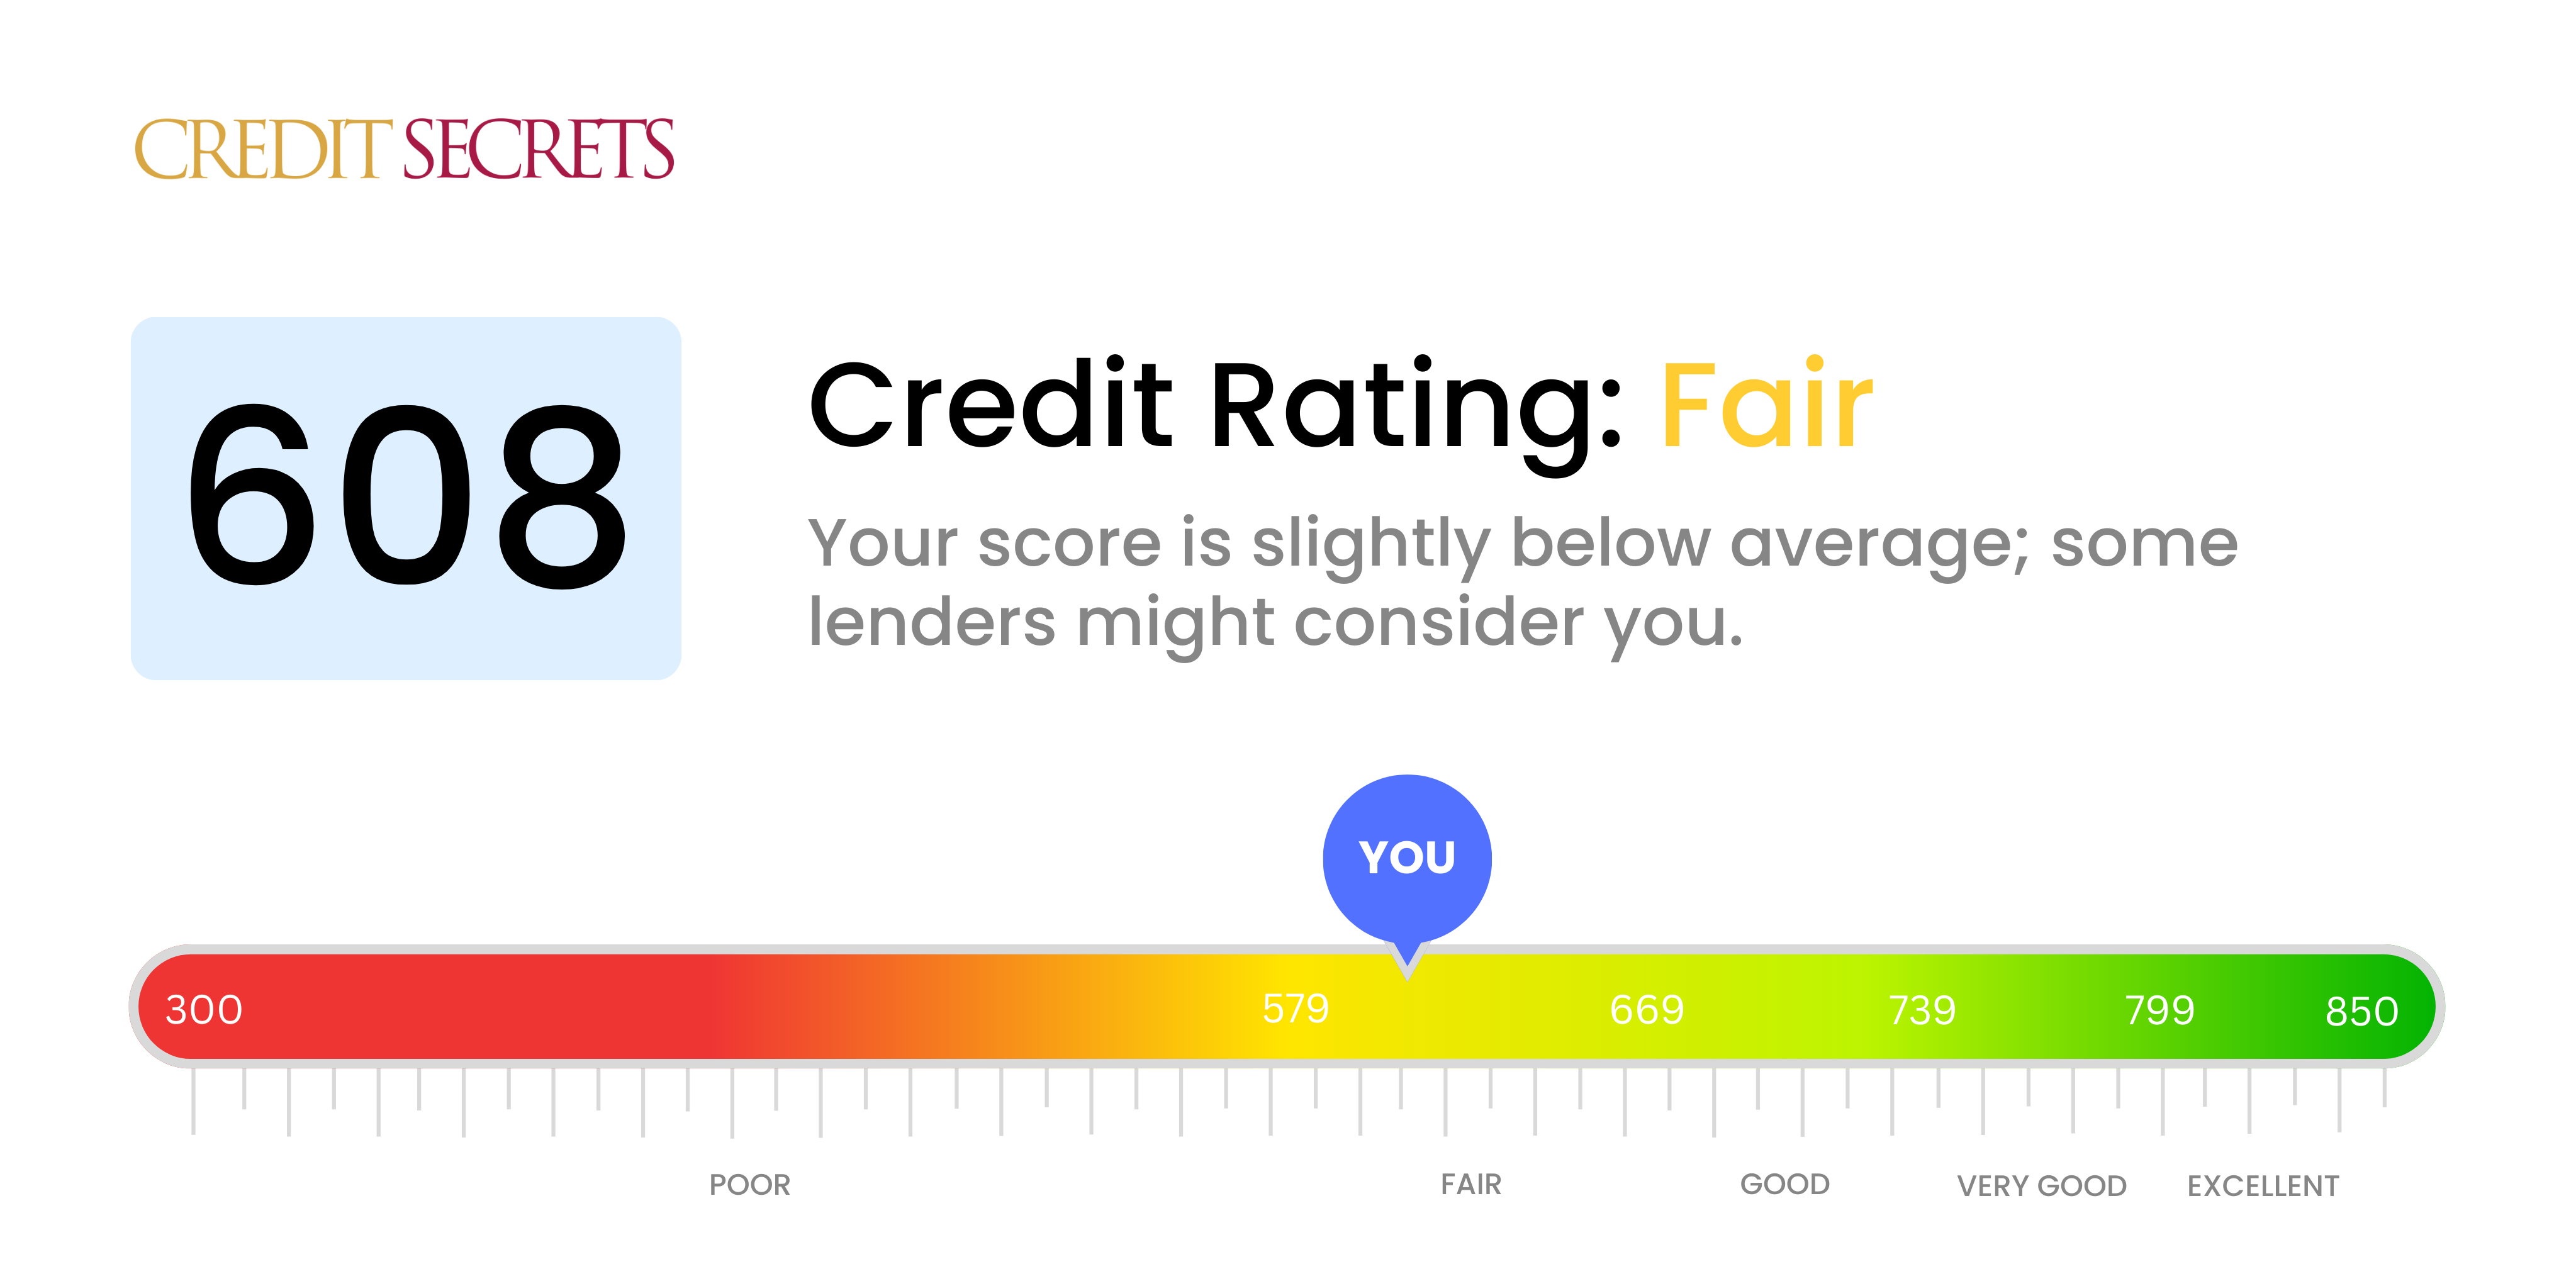 Is 608 a good credit score?